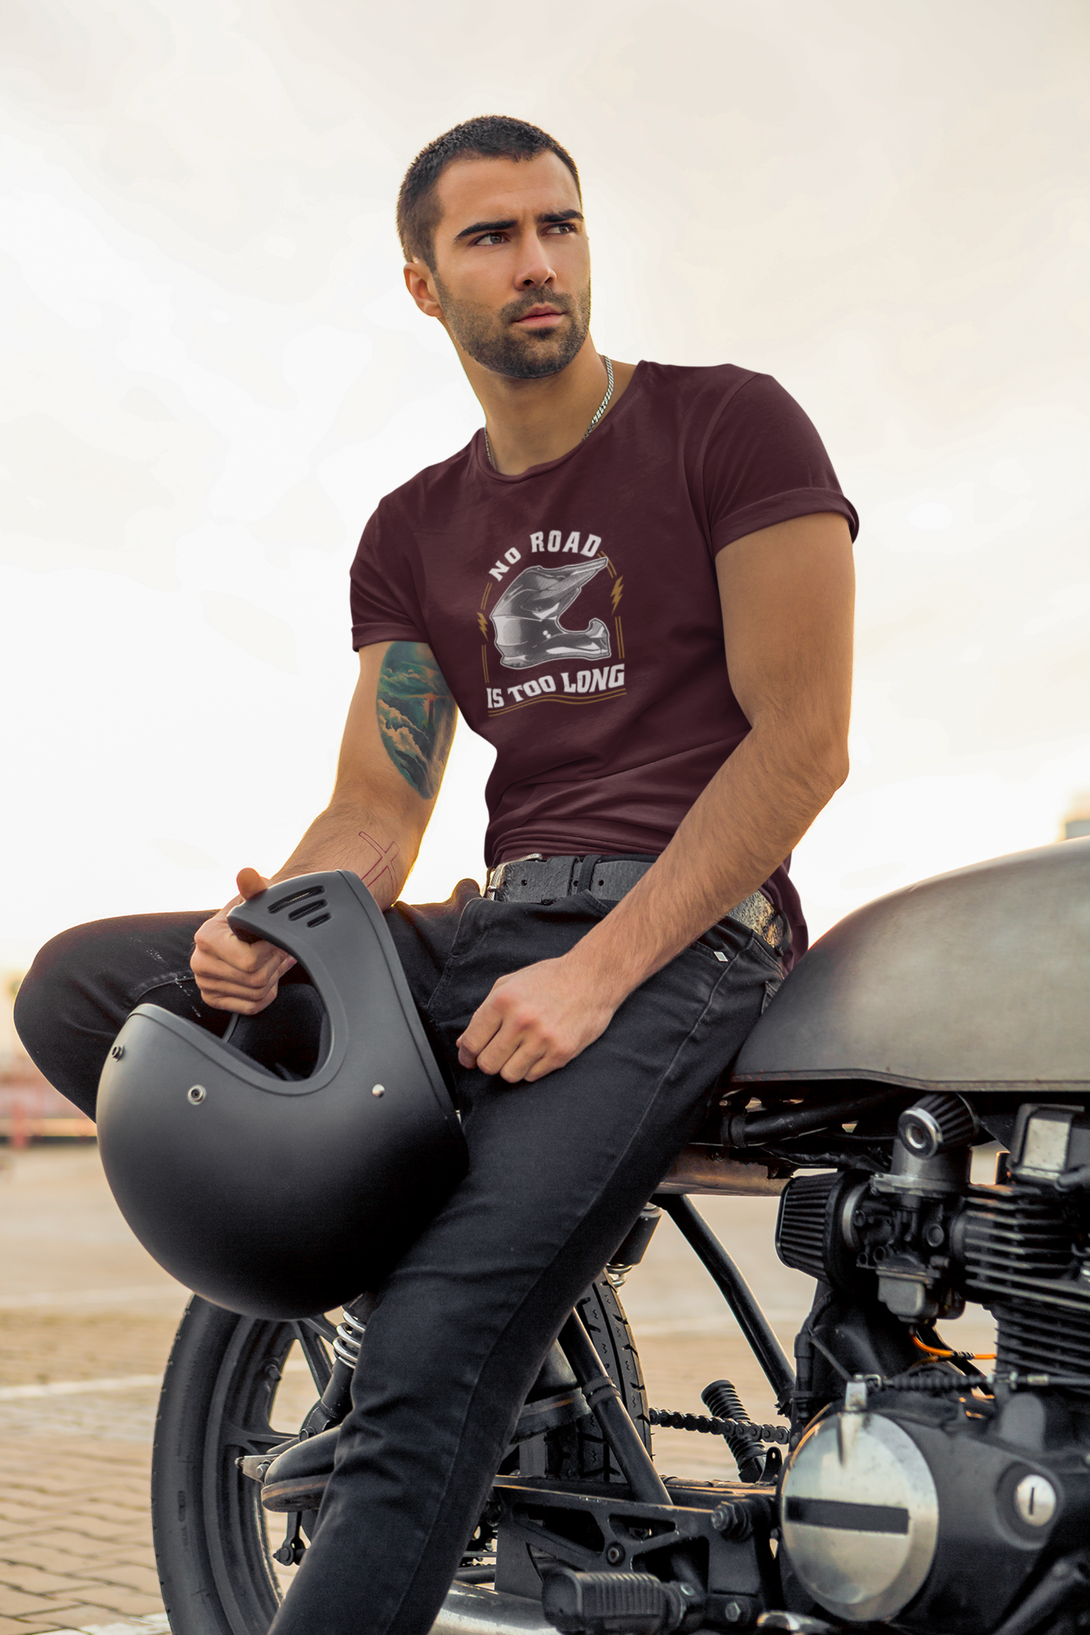 No Road Is Too Long Printed T-Shirt For Men - WowWaves - 10